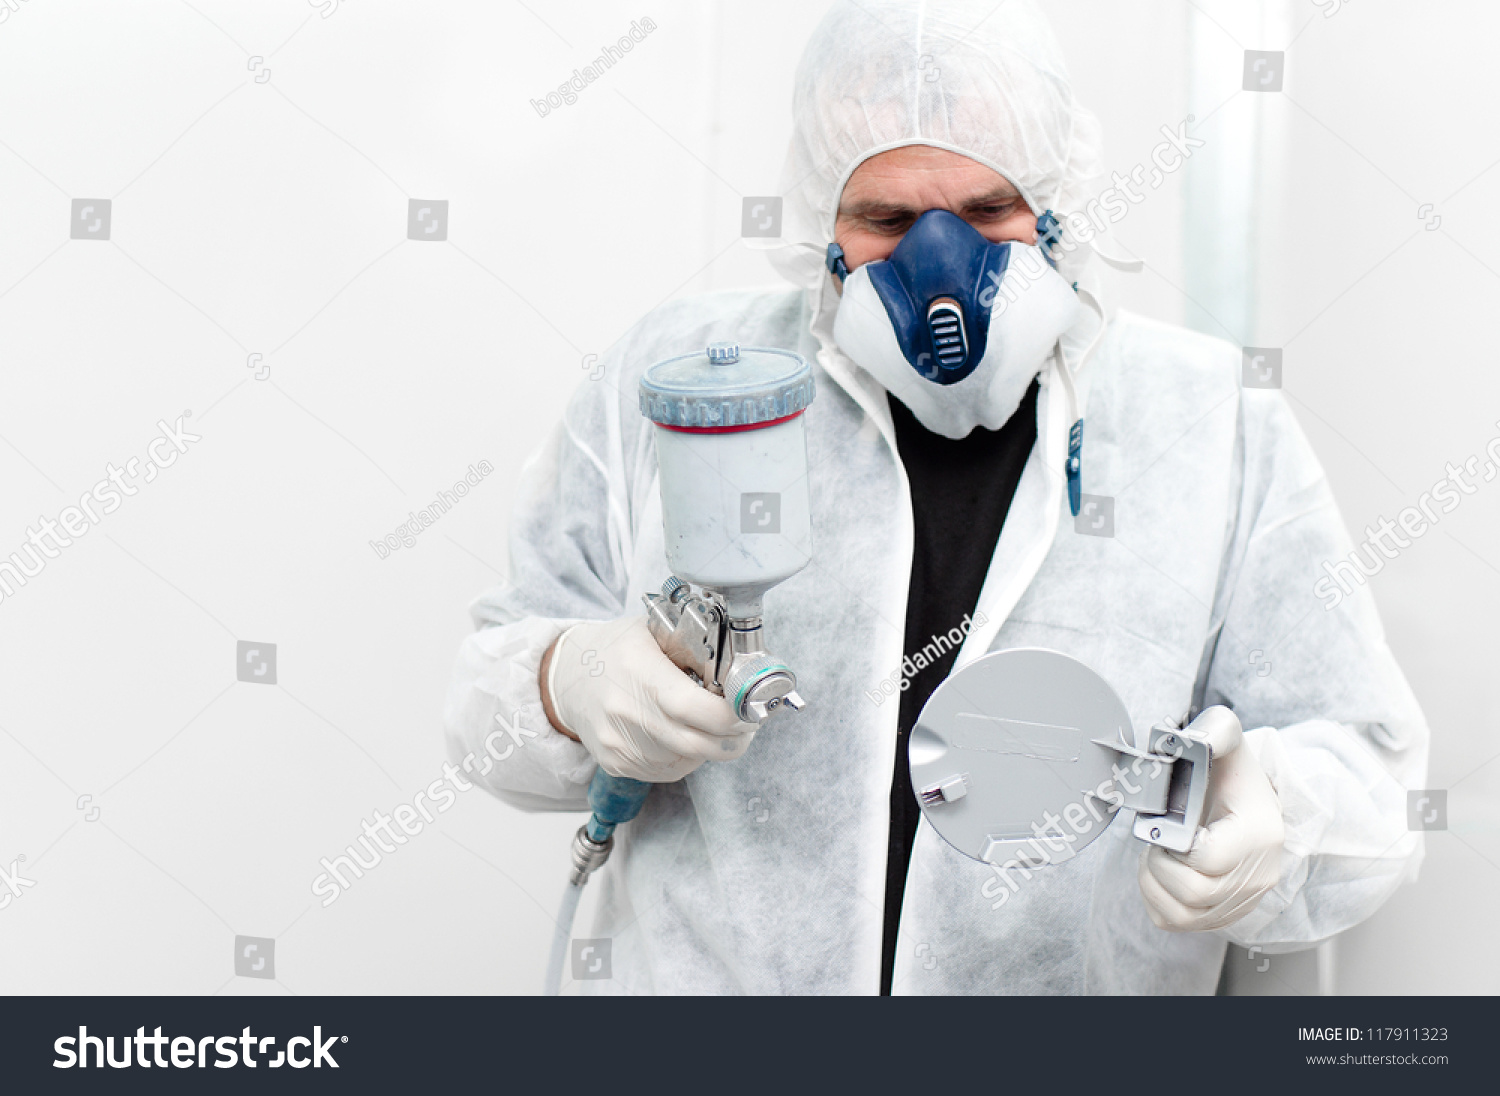 Auto Worker Painting Car Body Component Stock Photo 117911323 ...